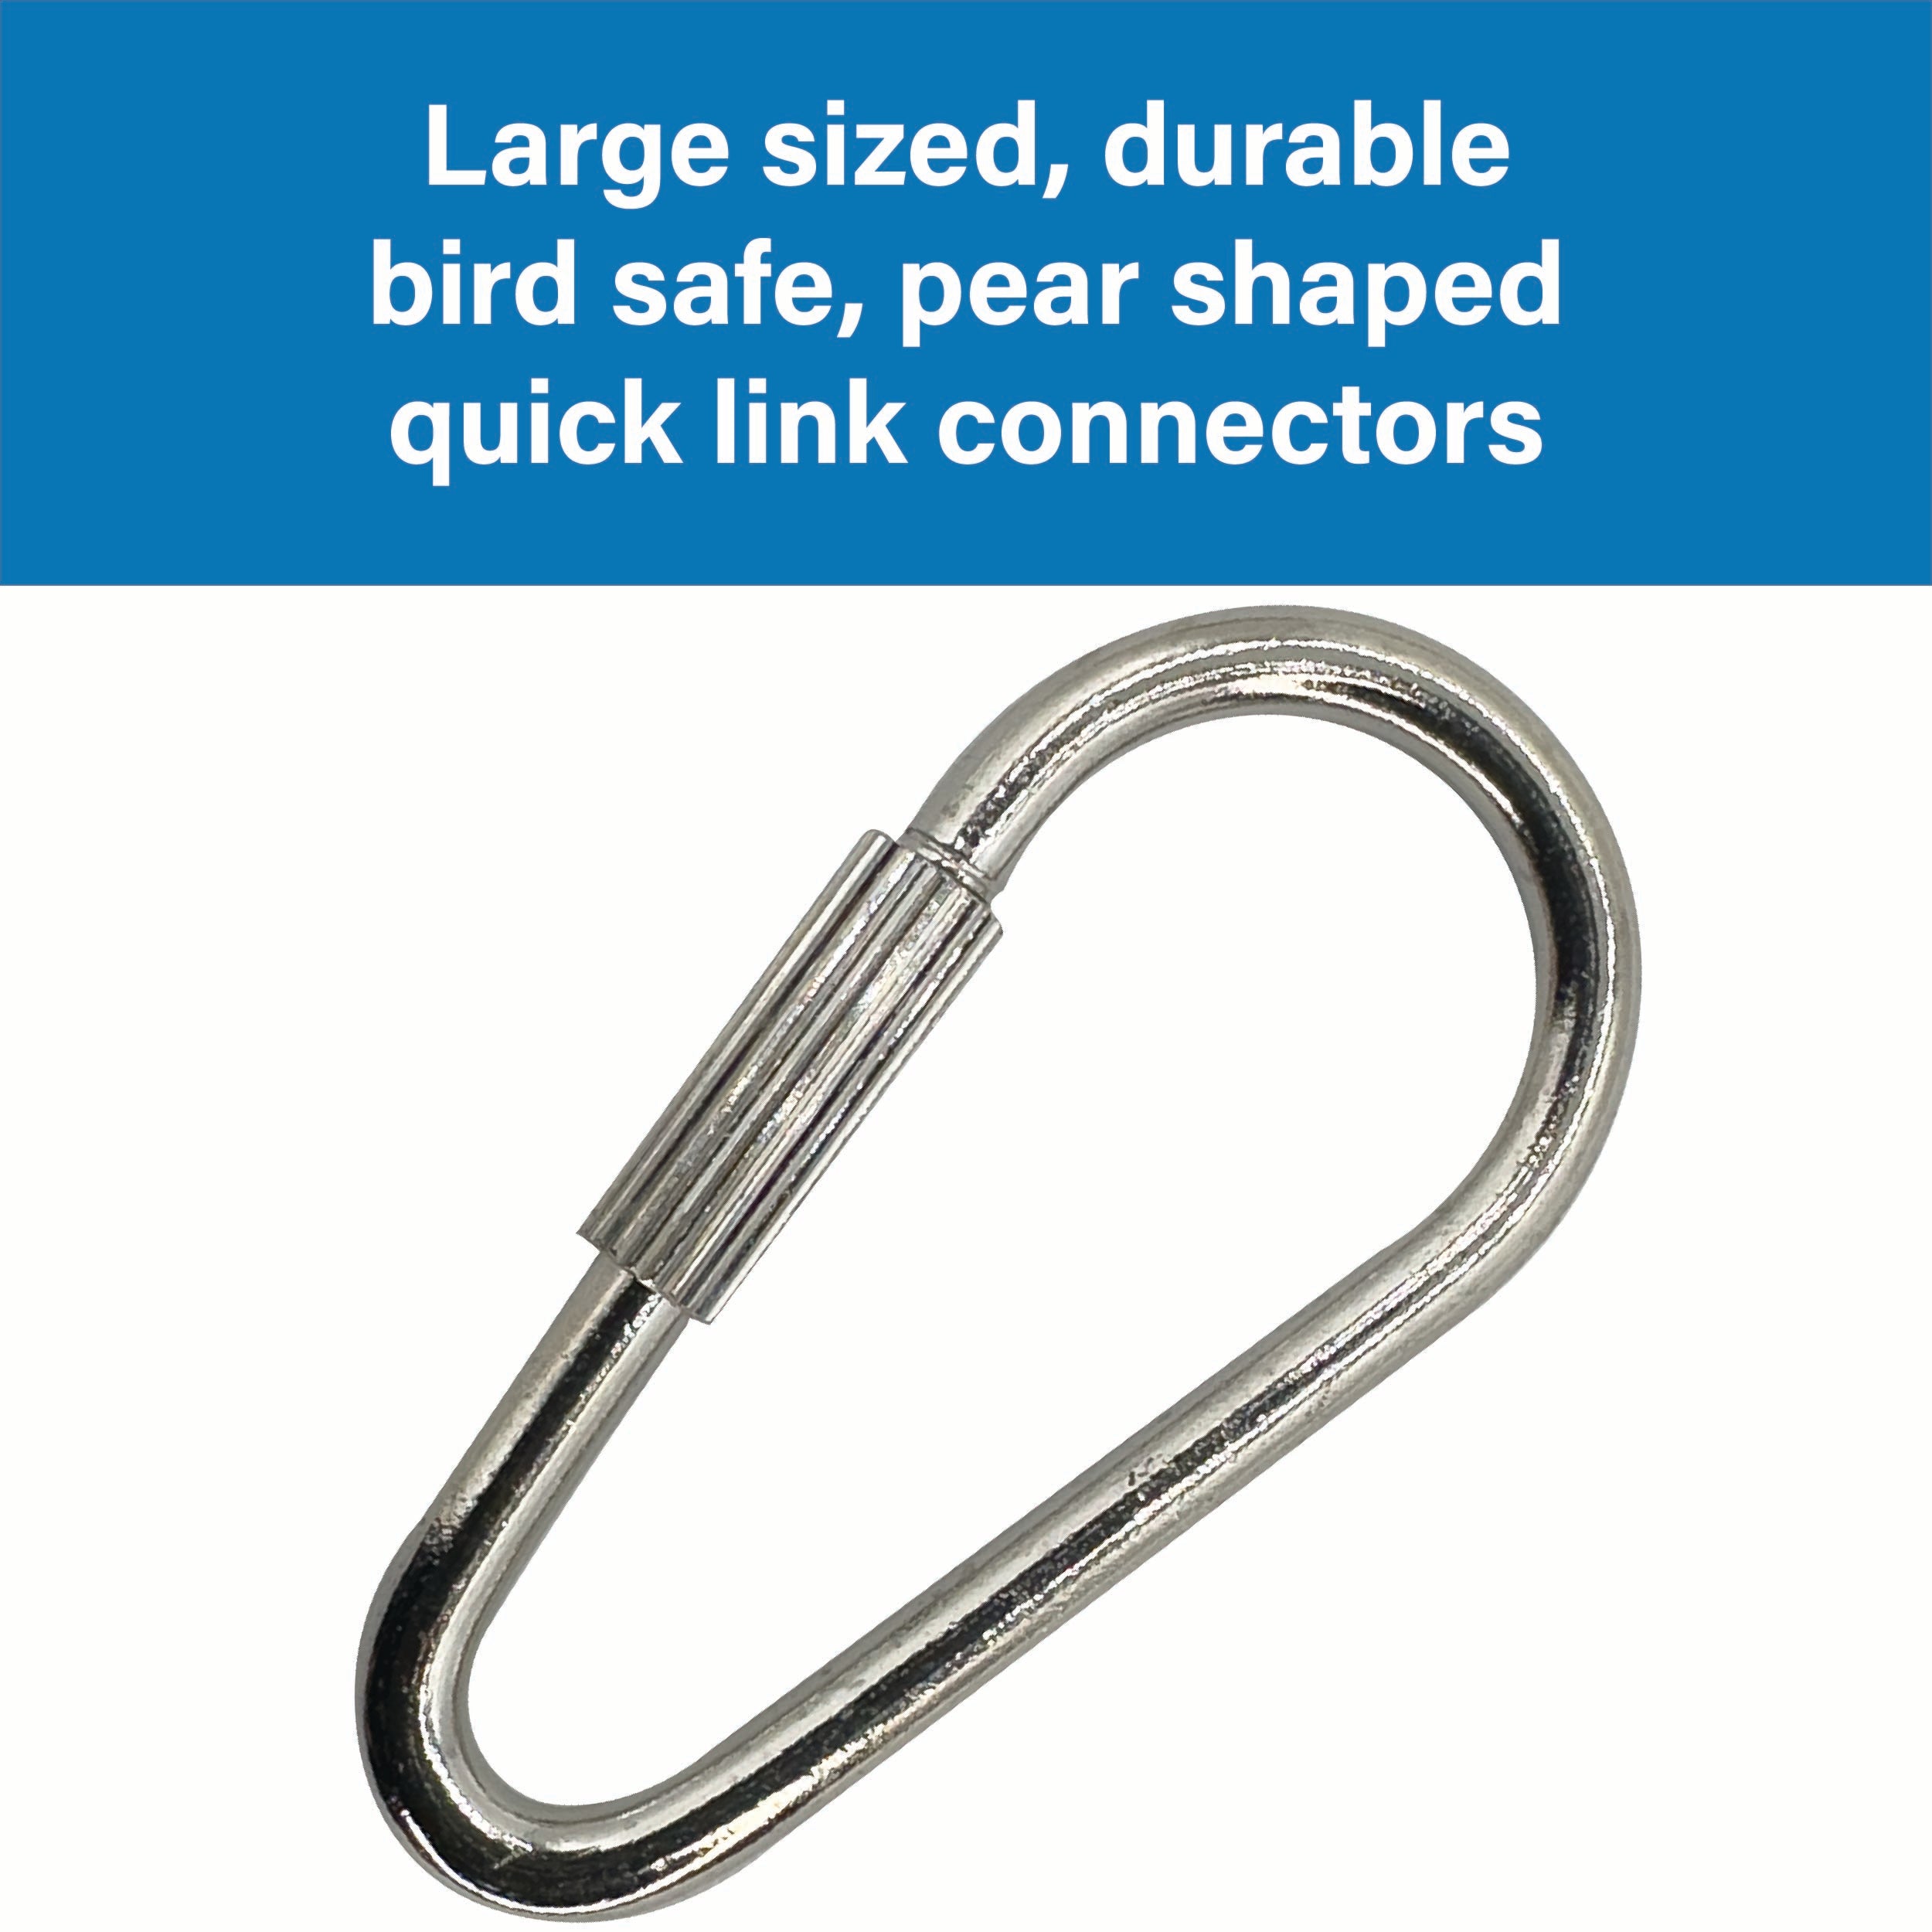 7028 Pk3 Nickel Plated Steel Quick Link 1 5/8 Inch